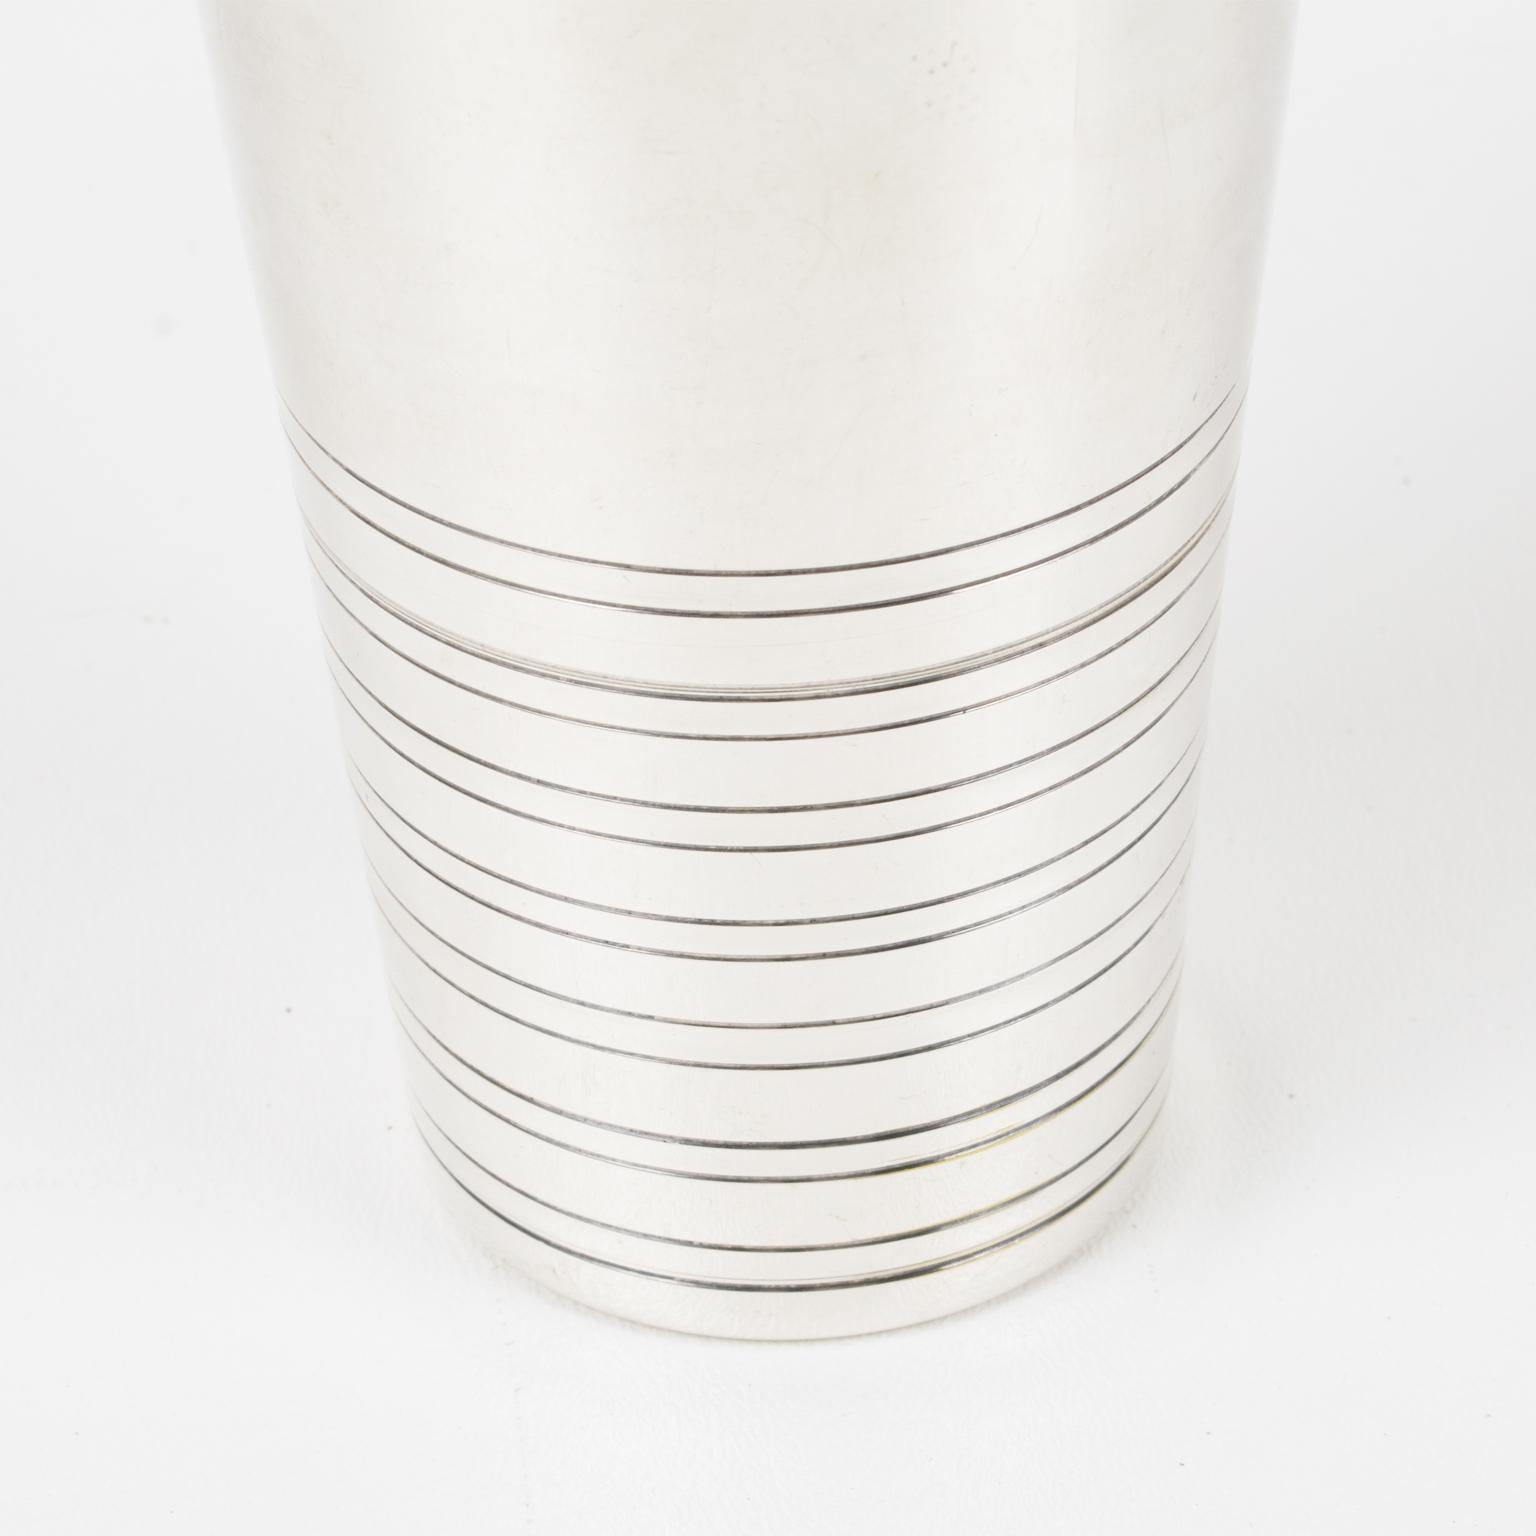 Mid-20th Century Art Deco Silver Plate Cocktail Shaker by Capargent France